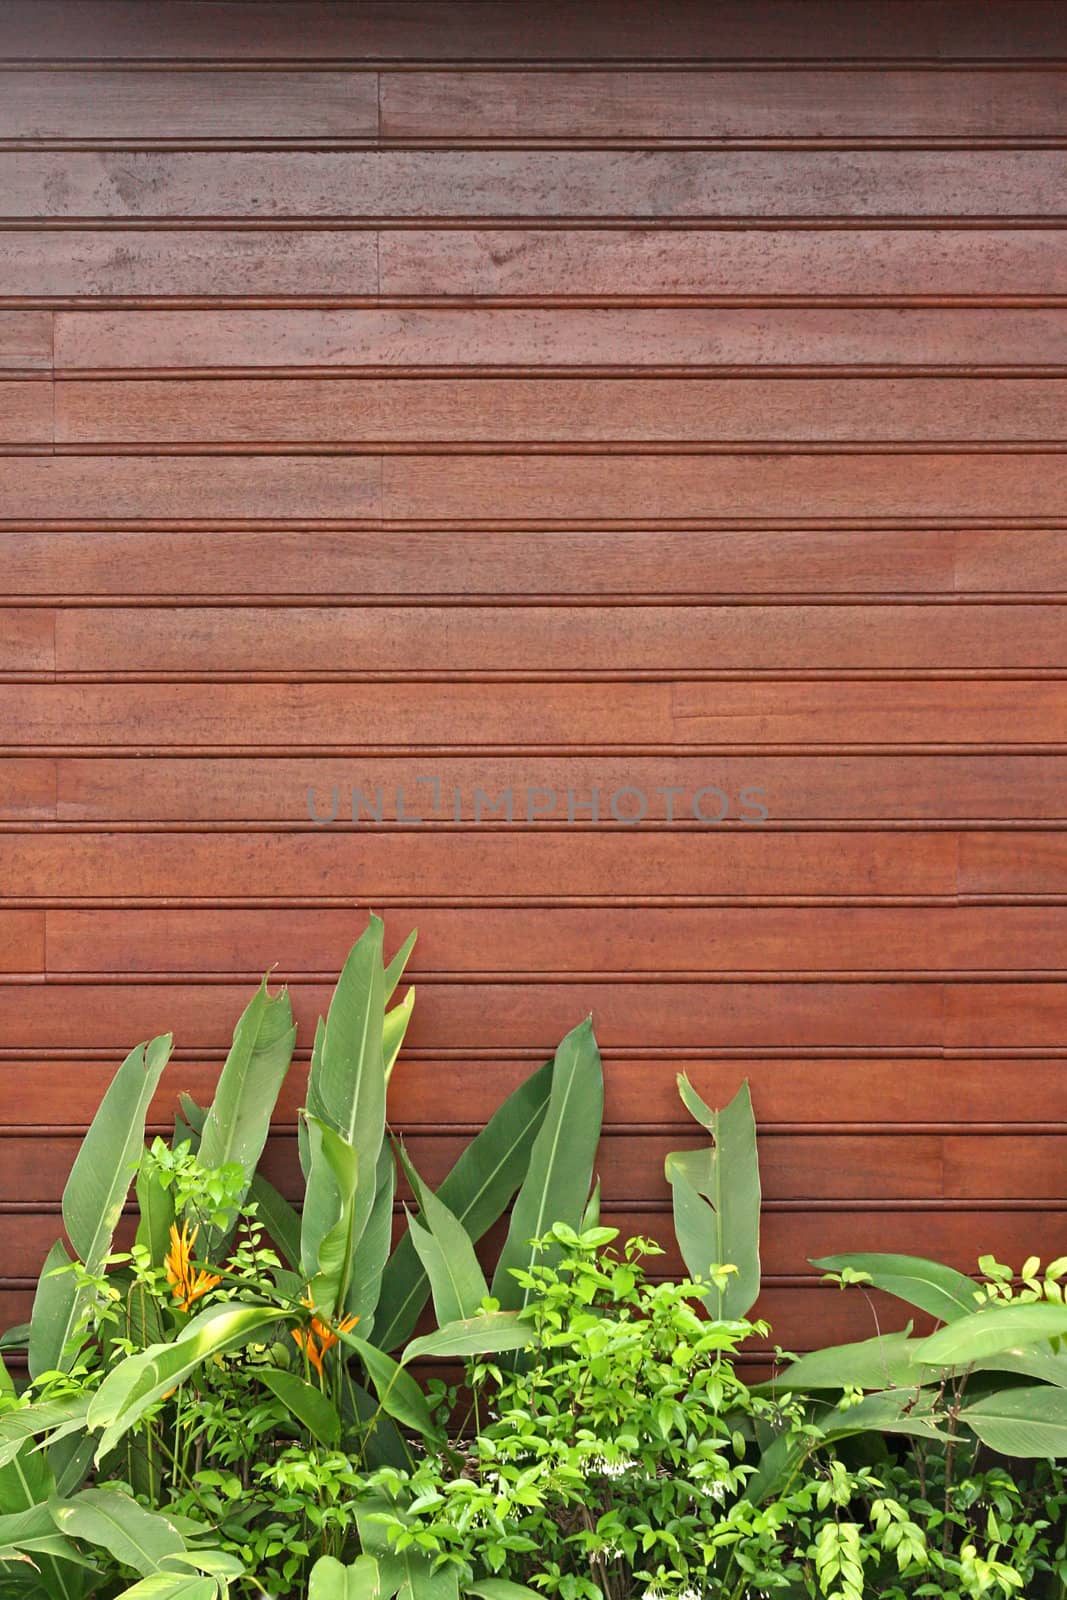 Red brown lath wall with fresh green plants and flowers in the foreground. Space for additional text in the upper half. Vertical perspective.